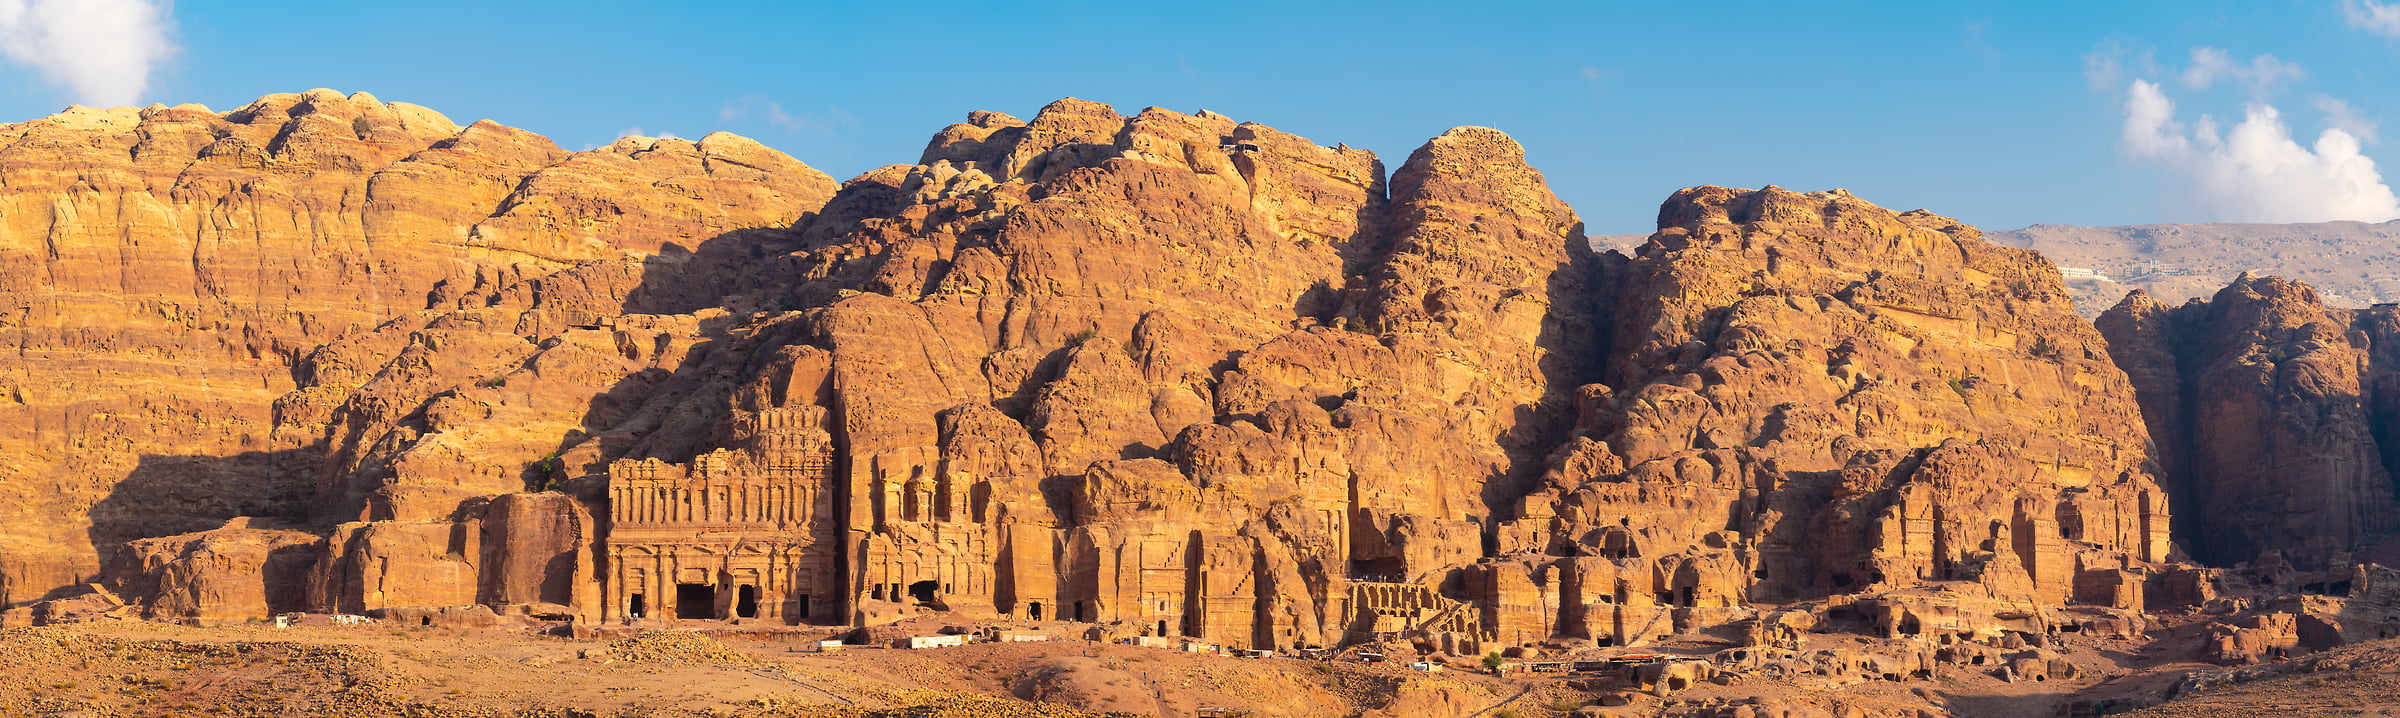 484 megapixels! A very high resolution, large-format VAST photo print of the tombs in Petra, Jordan; panorama photograph created by Greg Probst in Petra, Jordan.